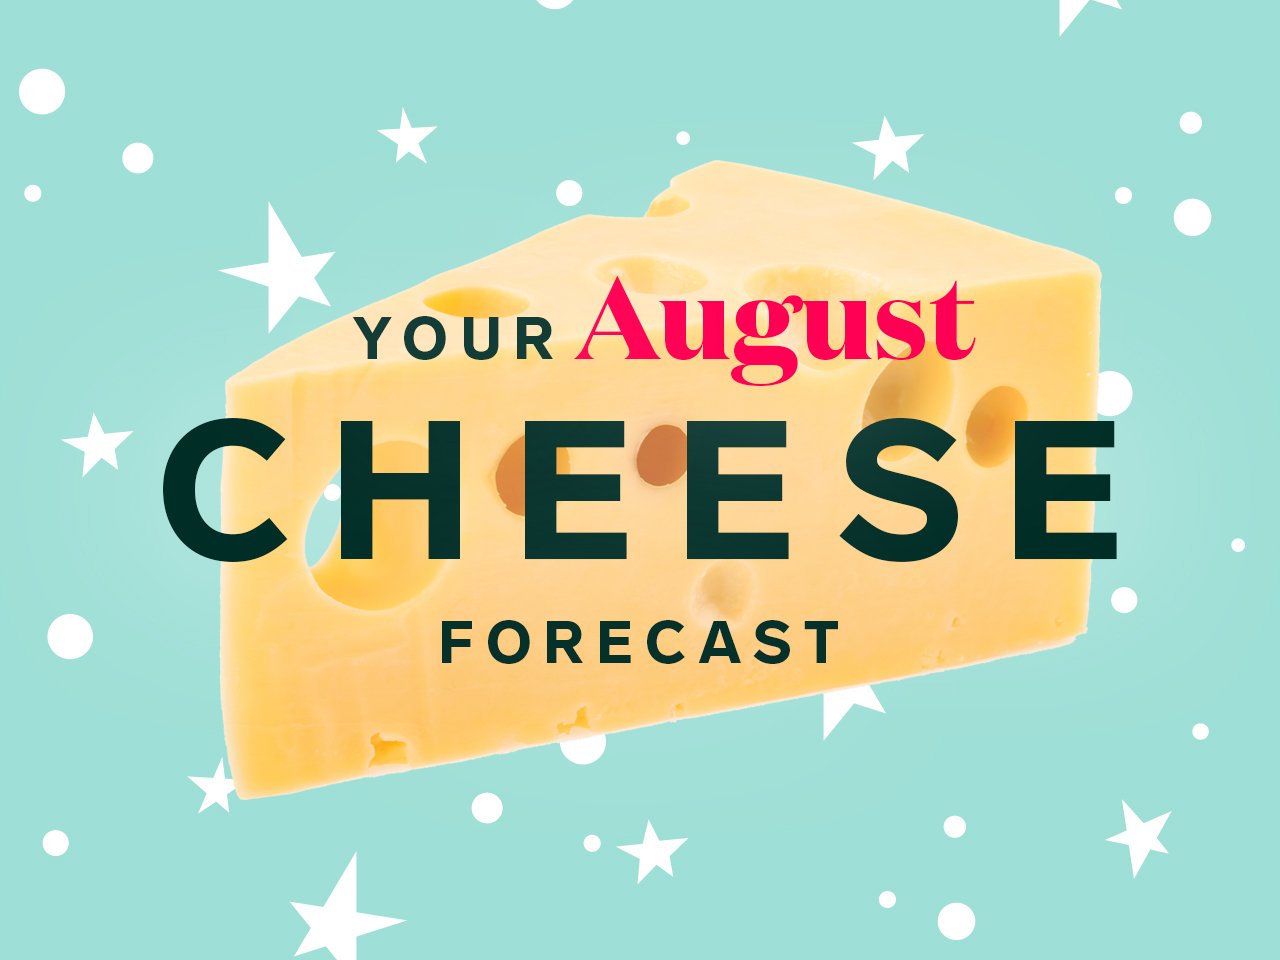 August Canadian cheeses forecast written in text over wedge of swiss cheese